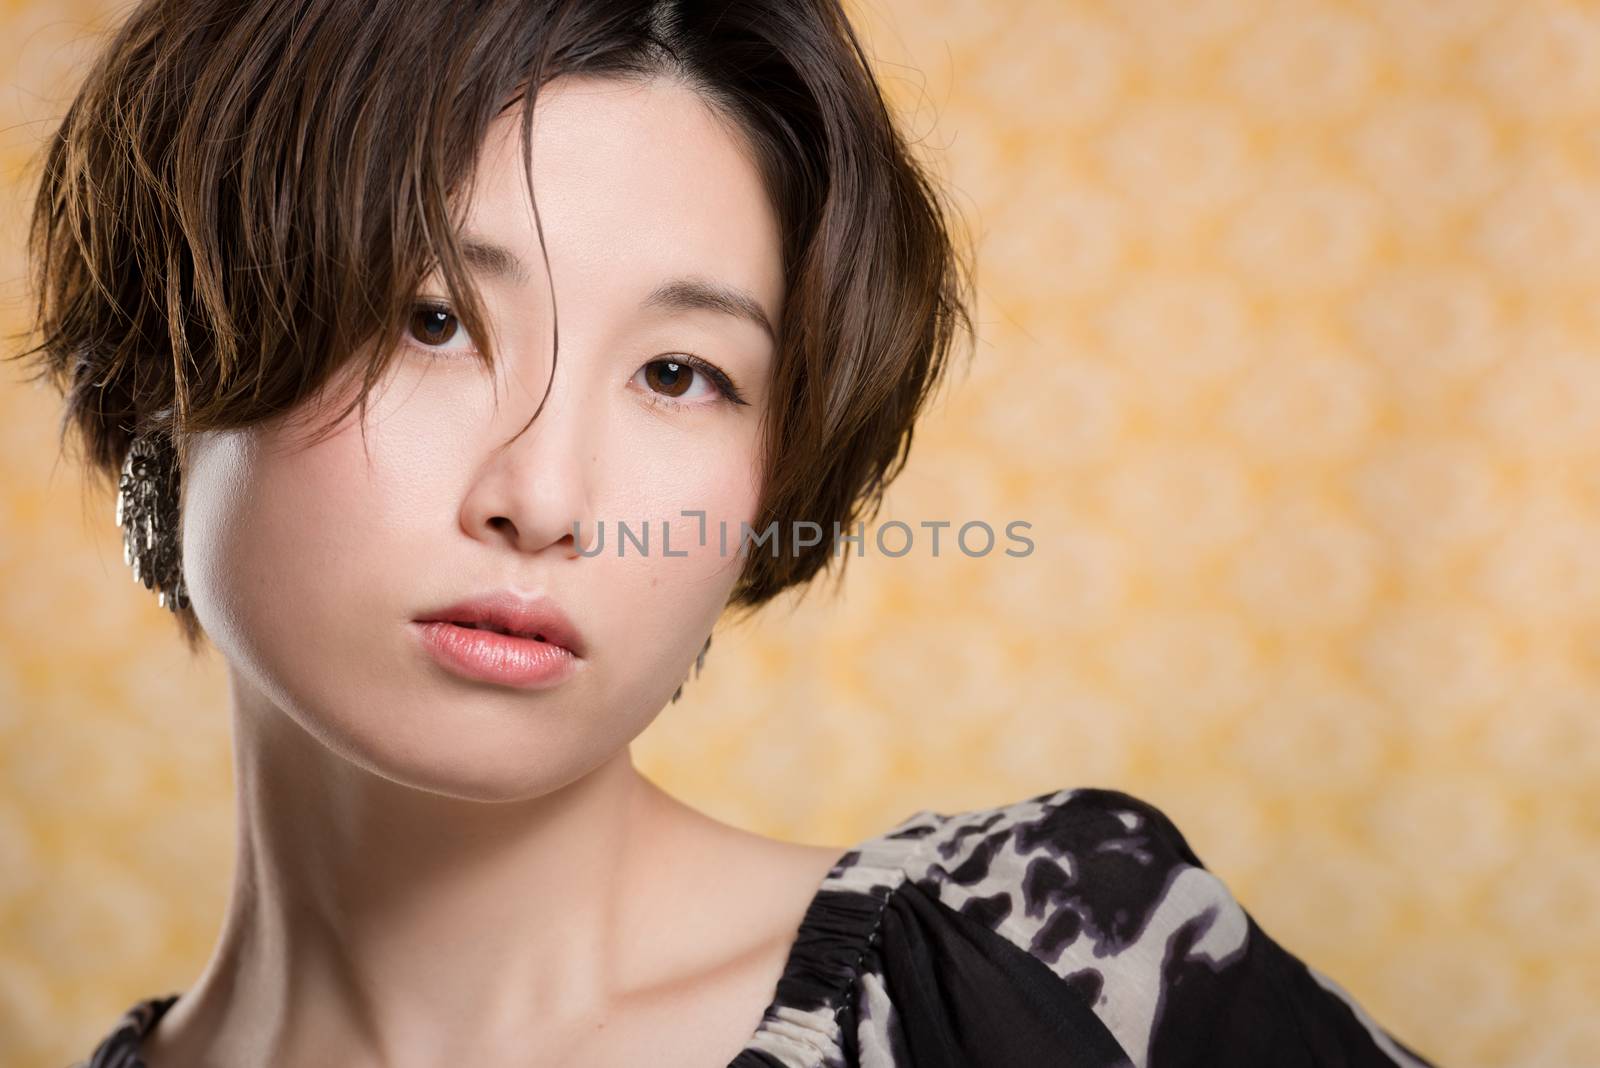 A portrait of a  young and beautiful Japanese woman shot on a yellow and white lace background.